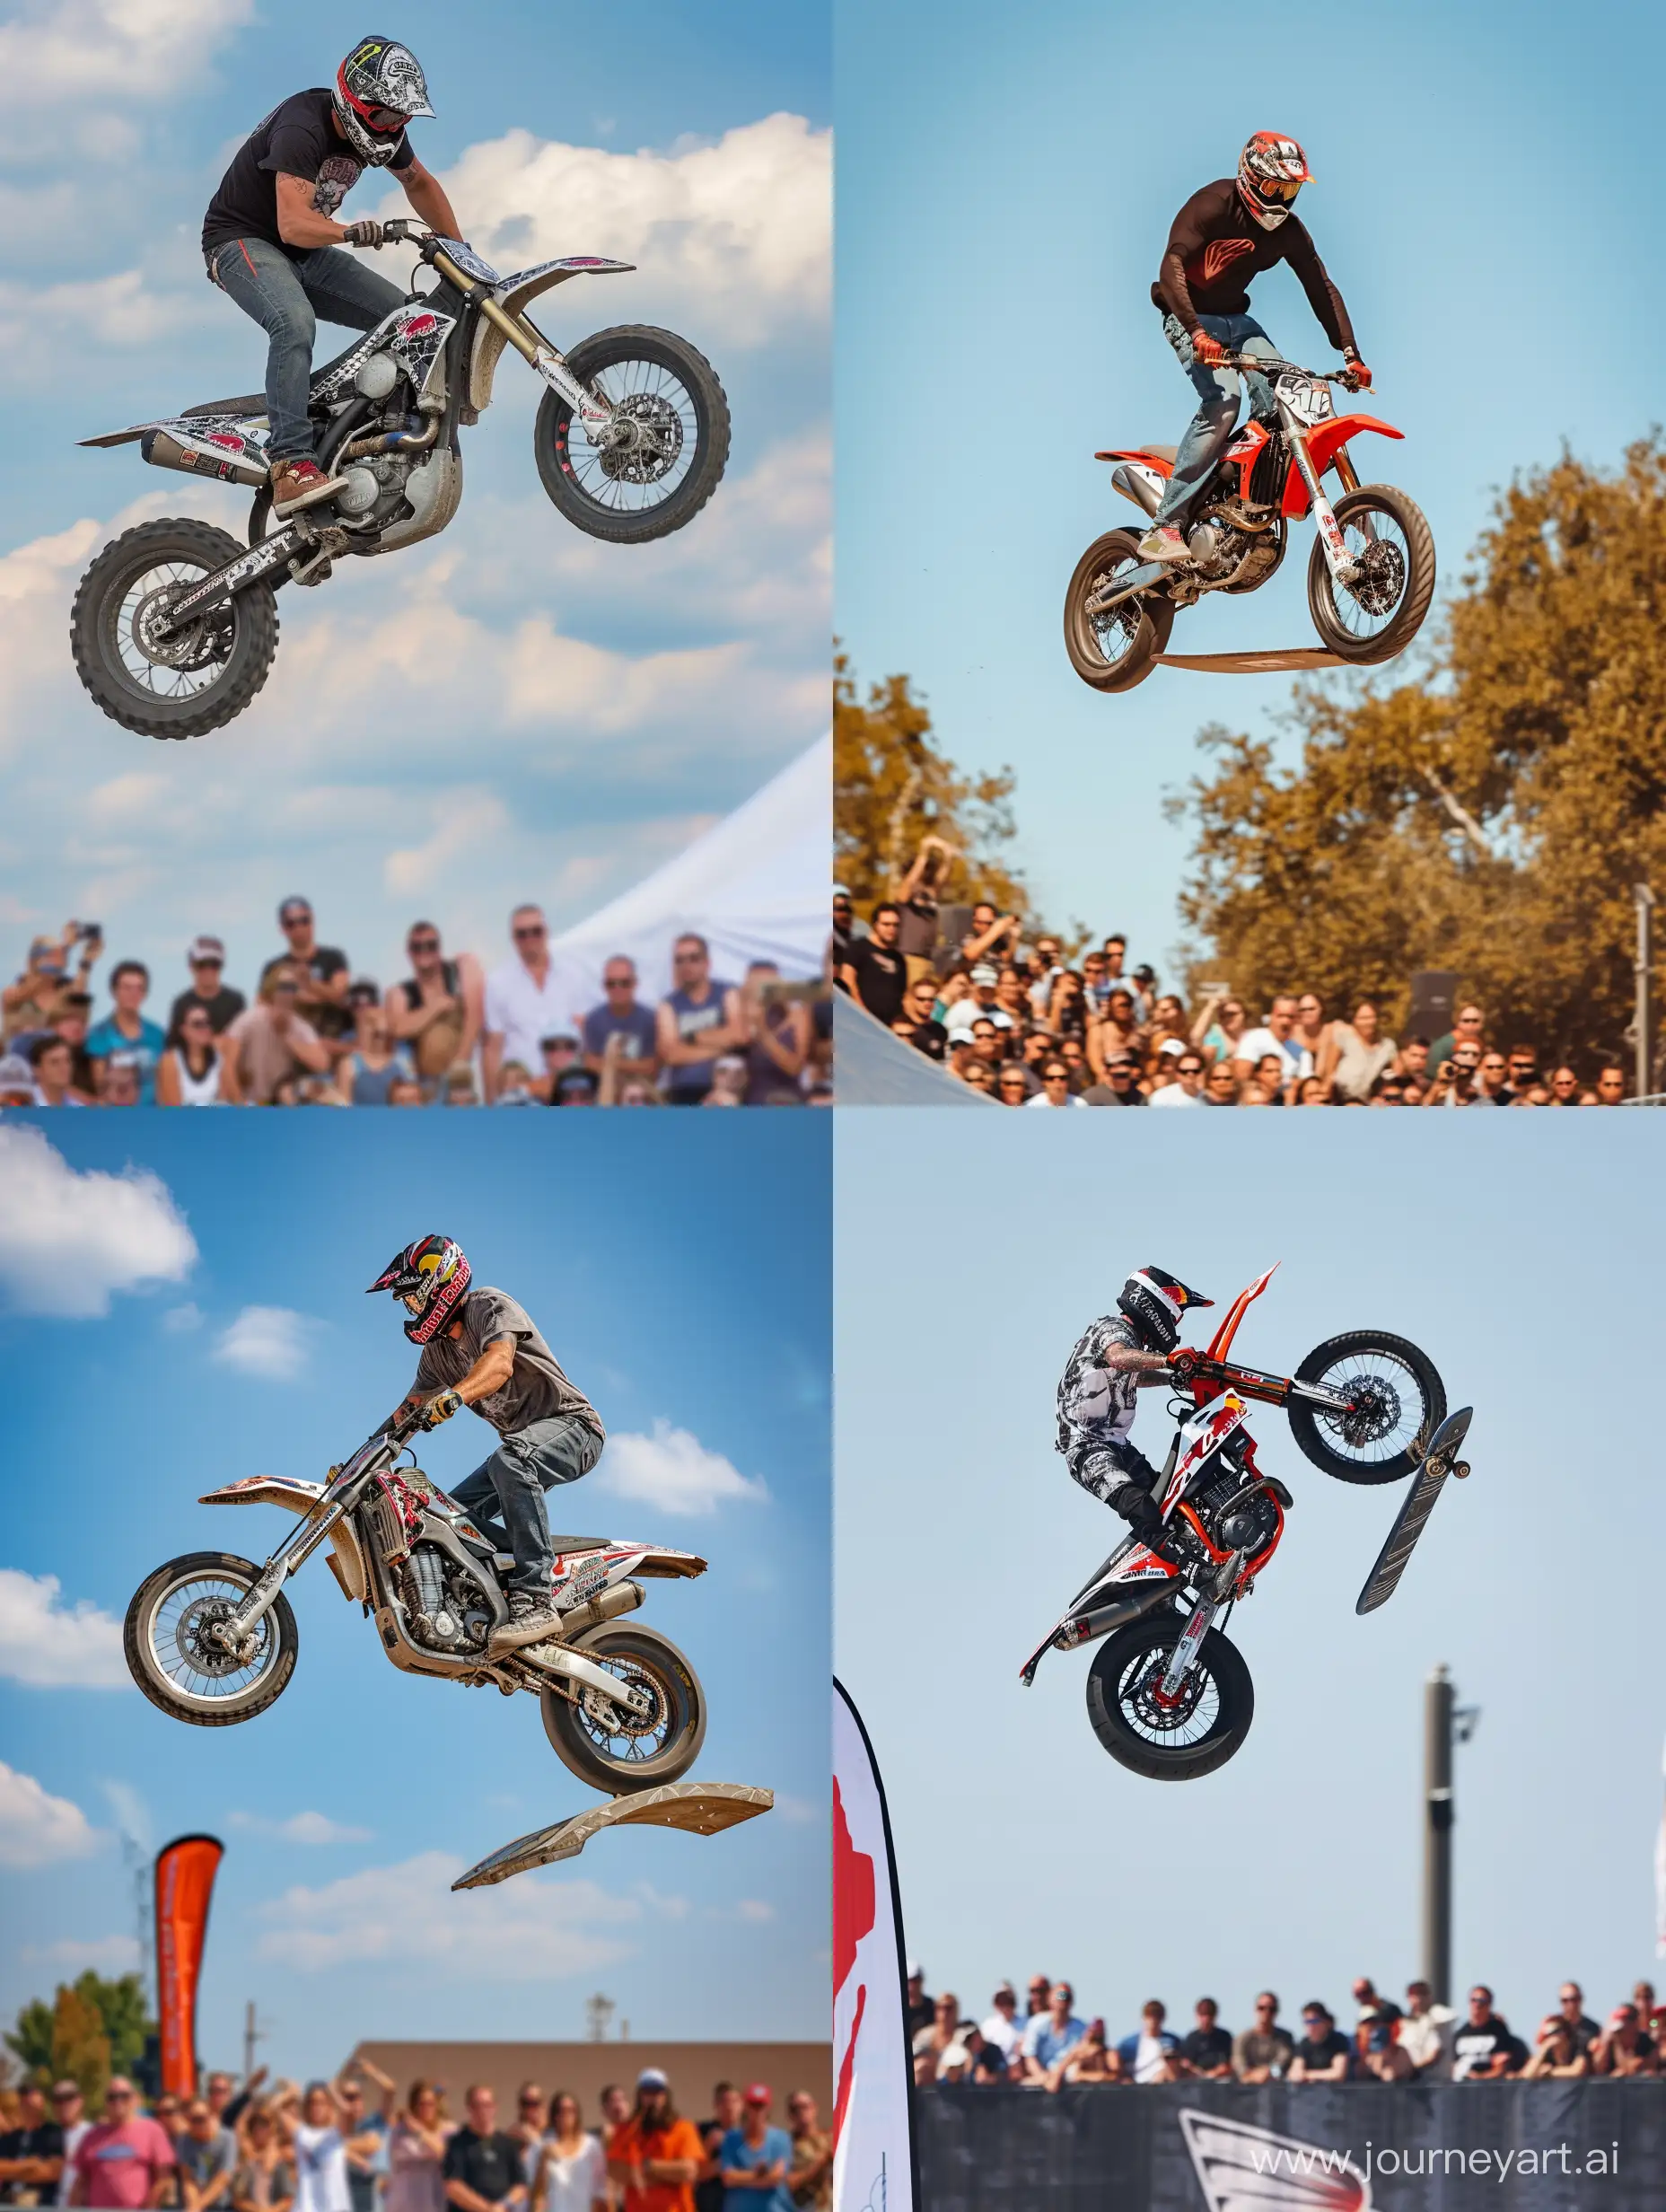 A man on a motorcycle jumps from a springboard, does a backflip trick against the backdrop of spectators, realistic 